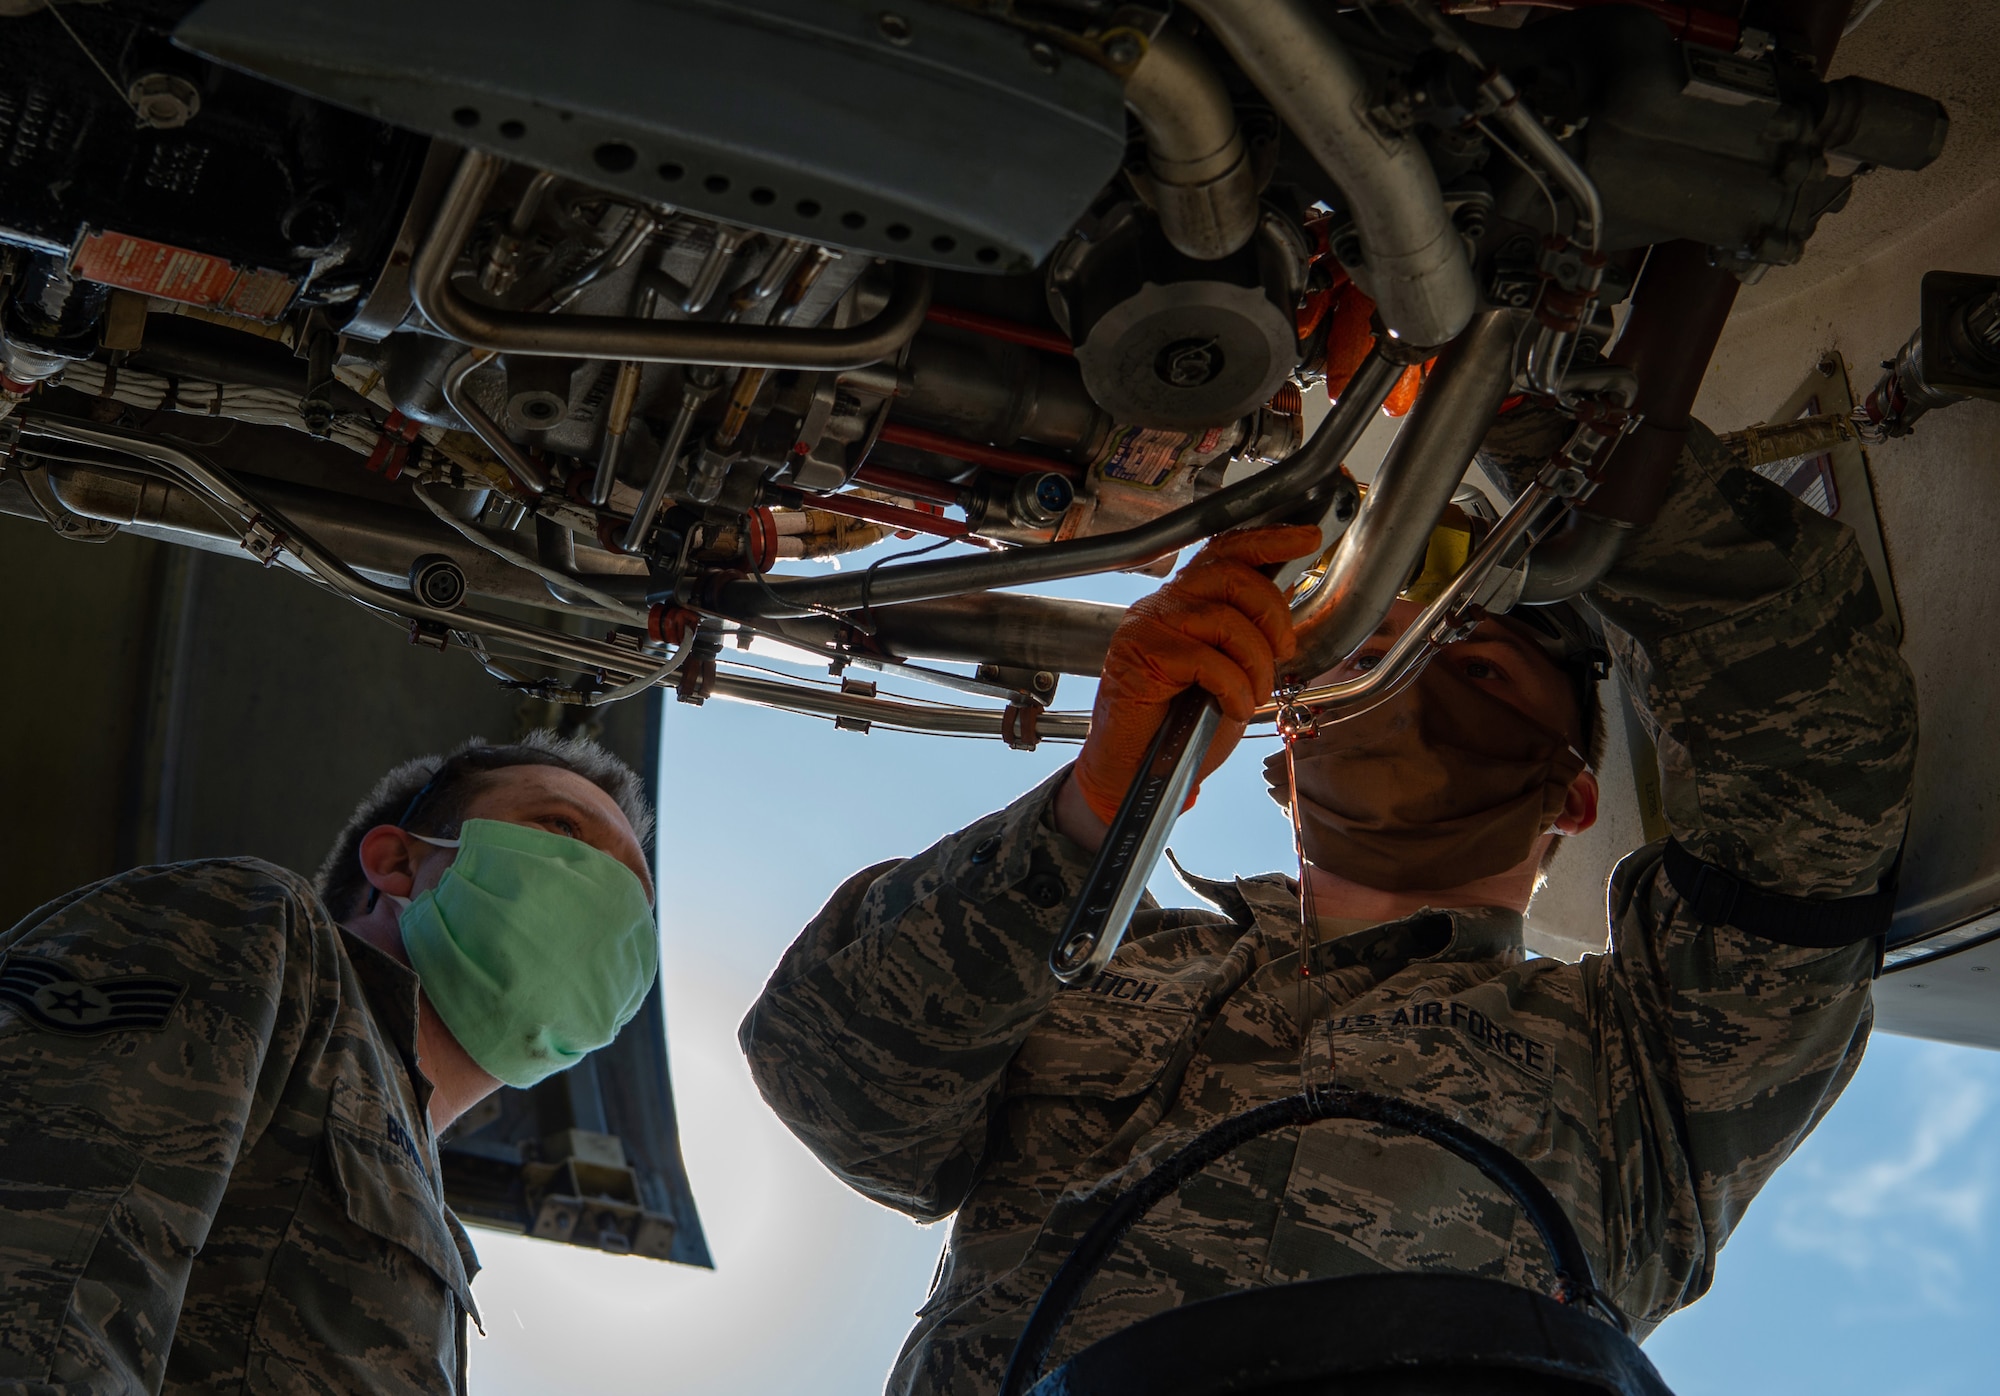 Staff Sgt. Christopher Bowen, 62nd Maintenance Squadron (MXS) hydraulics technician, supervises while Airman 1st Class Ian Cernetich, 62nd MXS hydraulics apprentice, works to remove a hydraulic pump from the engine of a C-17 Globemaster III at Joint Base Lewis-McChord, Wash., April 14, 2020. Both Airmen are wearing protective masks to help stop the spread of COVID-19 while they work. (U.S. Air Force photo by Senior Airman Tryphena Mayhugh)